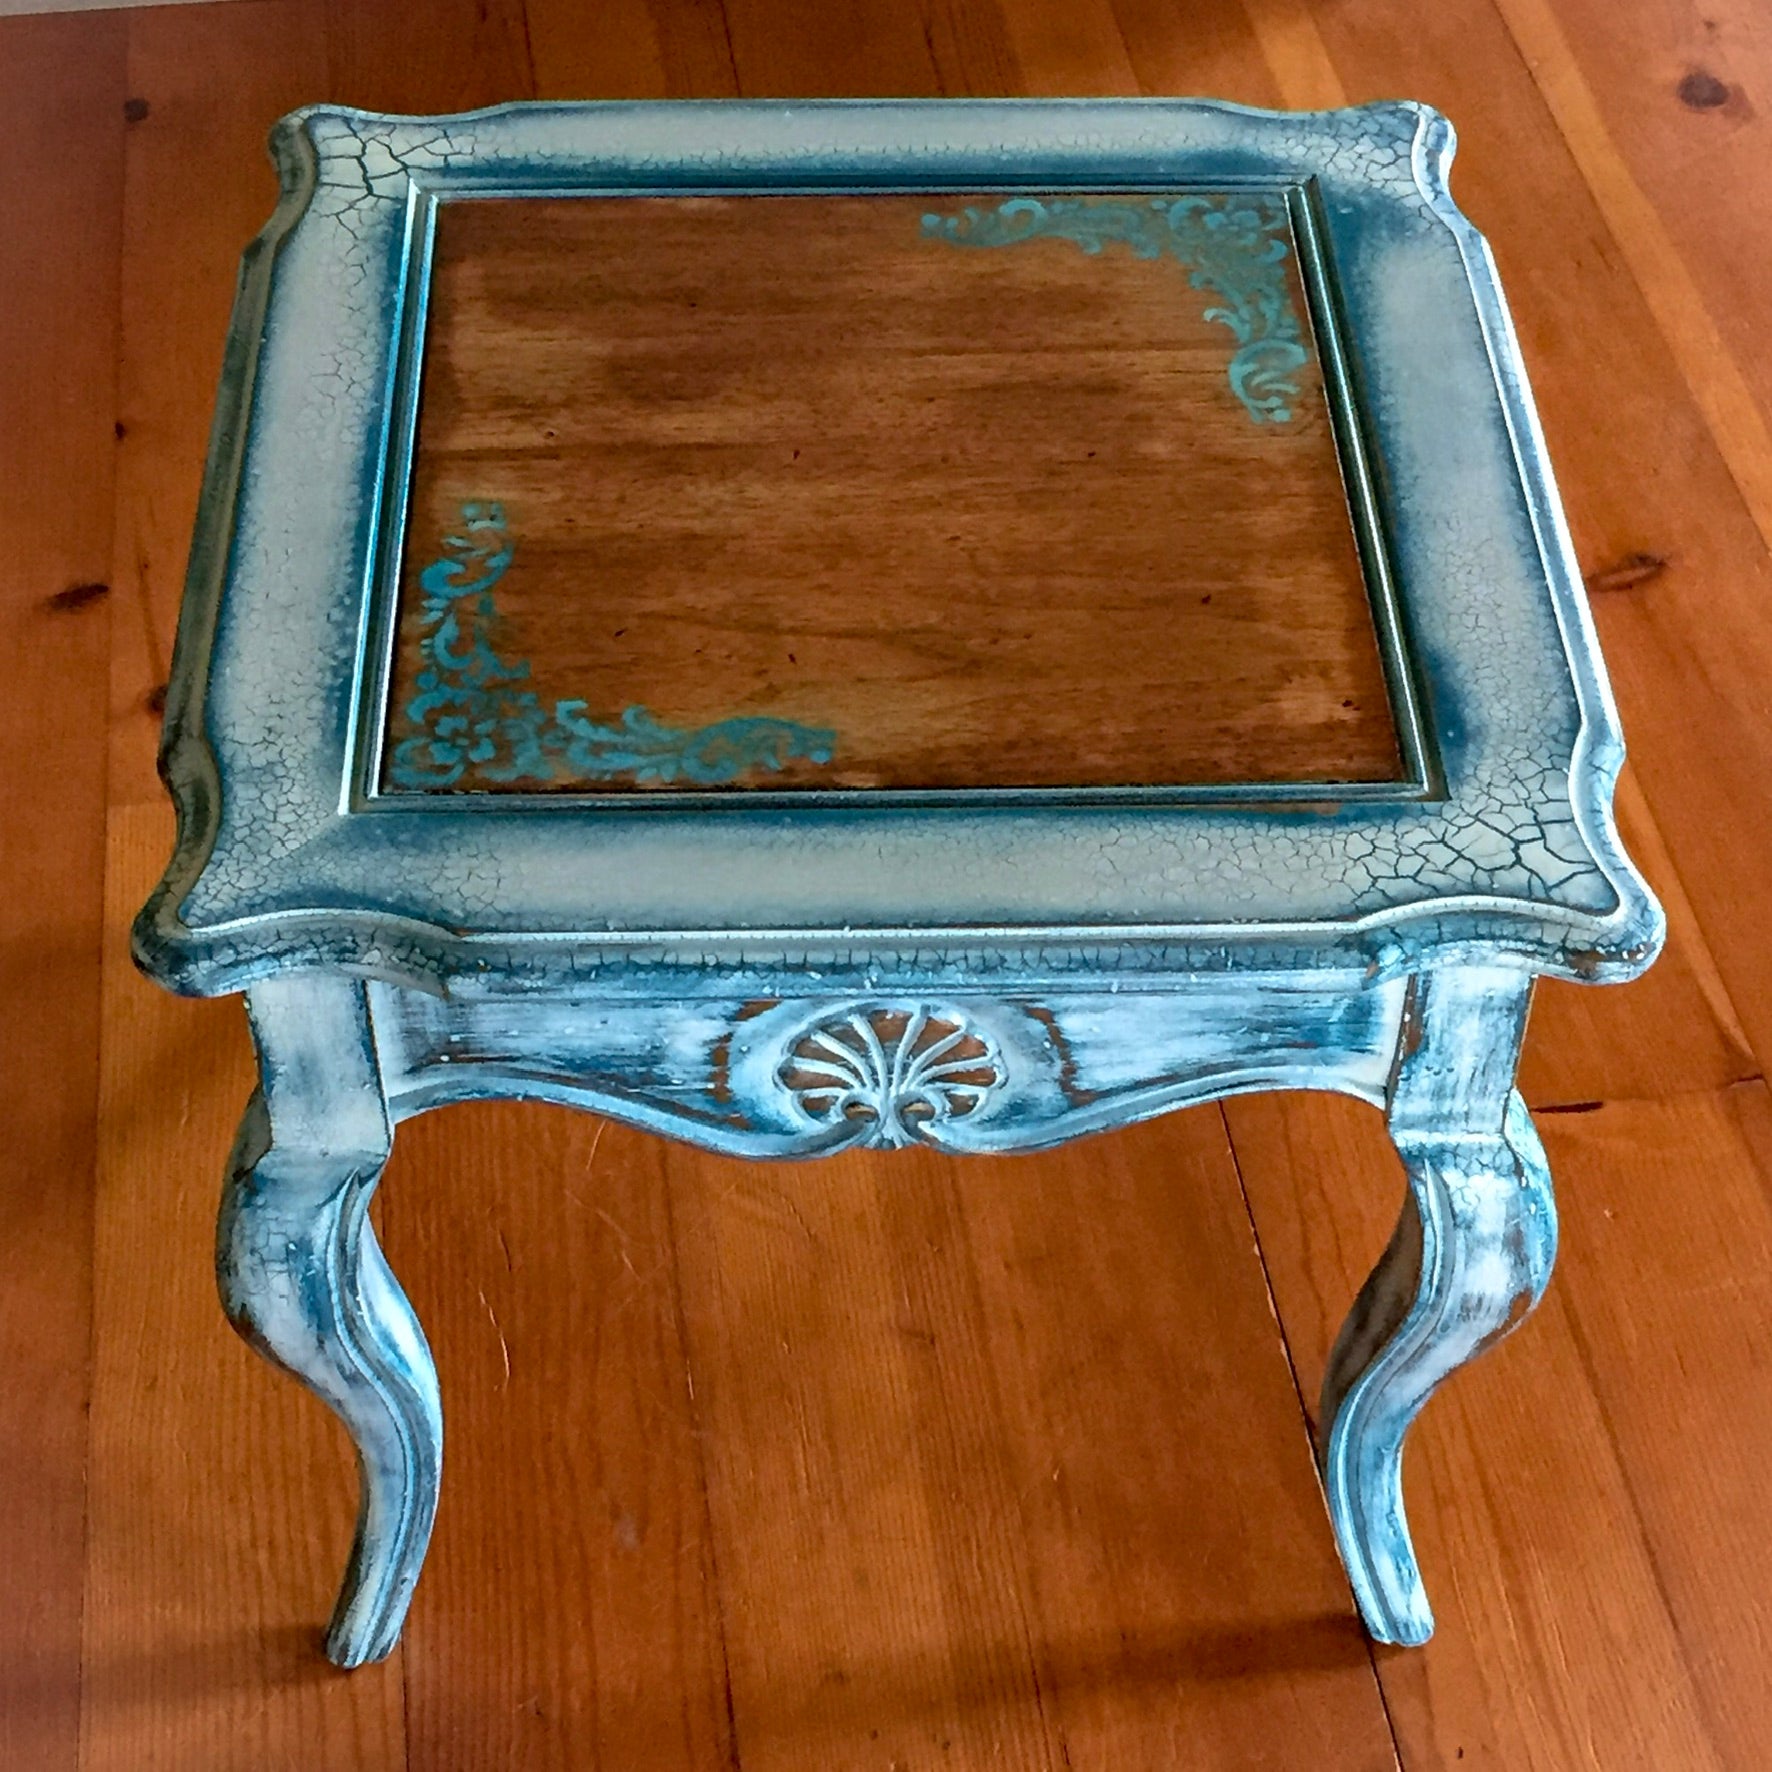 A French country style, end table with damask accents, a stained wood tabletop & distressed, white trim with blue undertones.